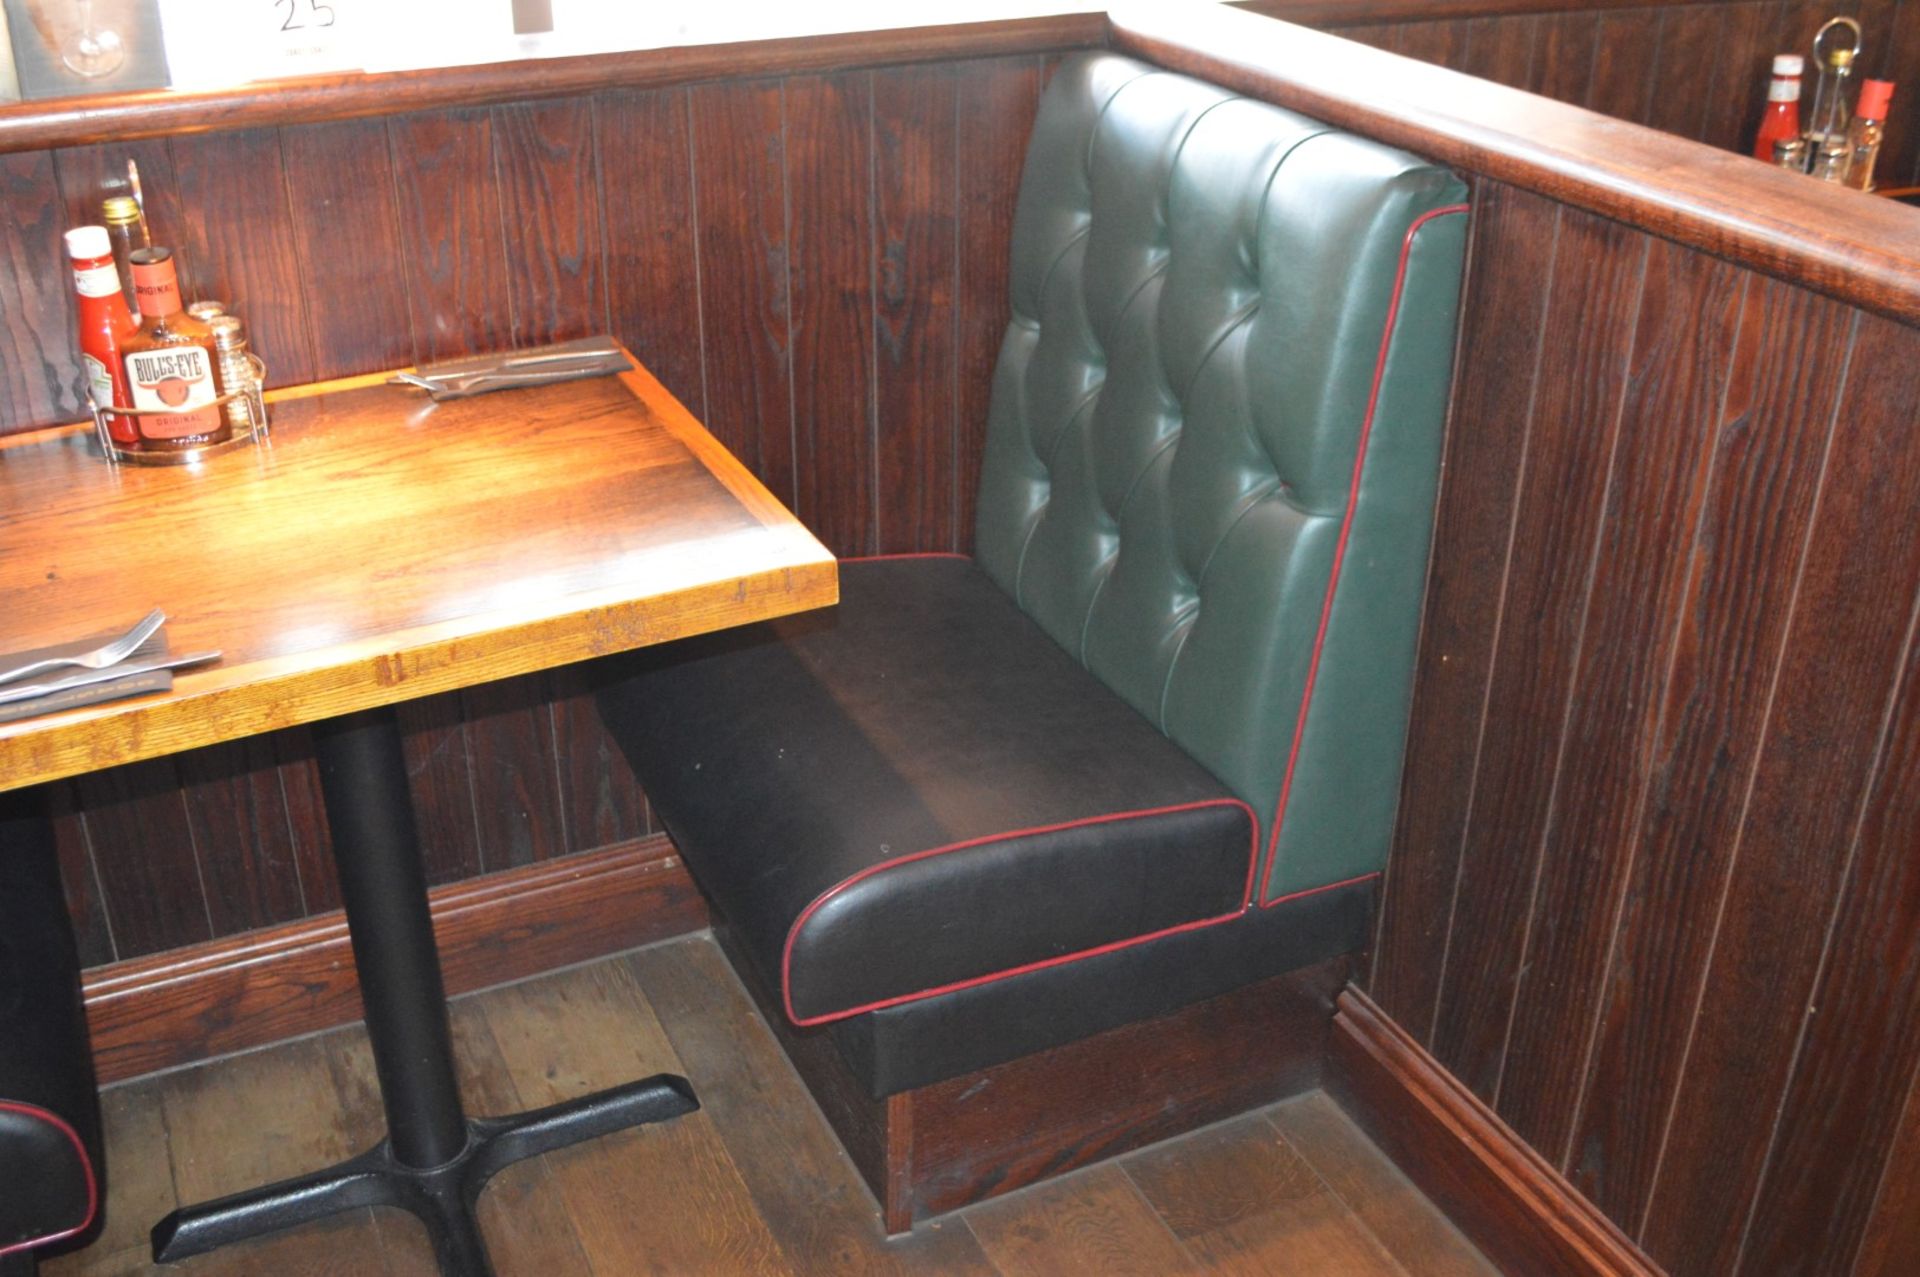 3 x Sections of Restaurant Booth Seating - Include 2 x Single Seats and 1 x Single Back to Back Seat - Image 11 of 12